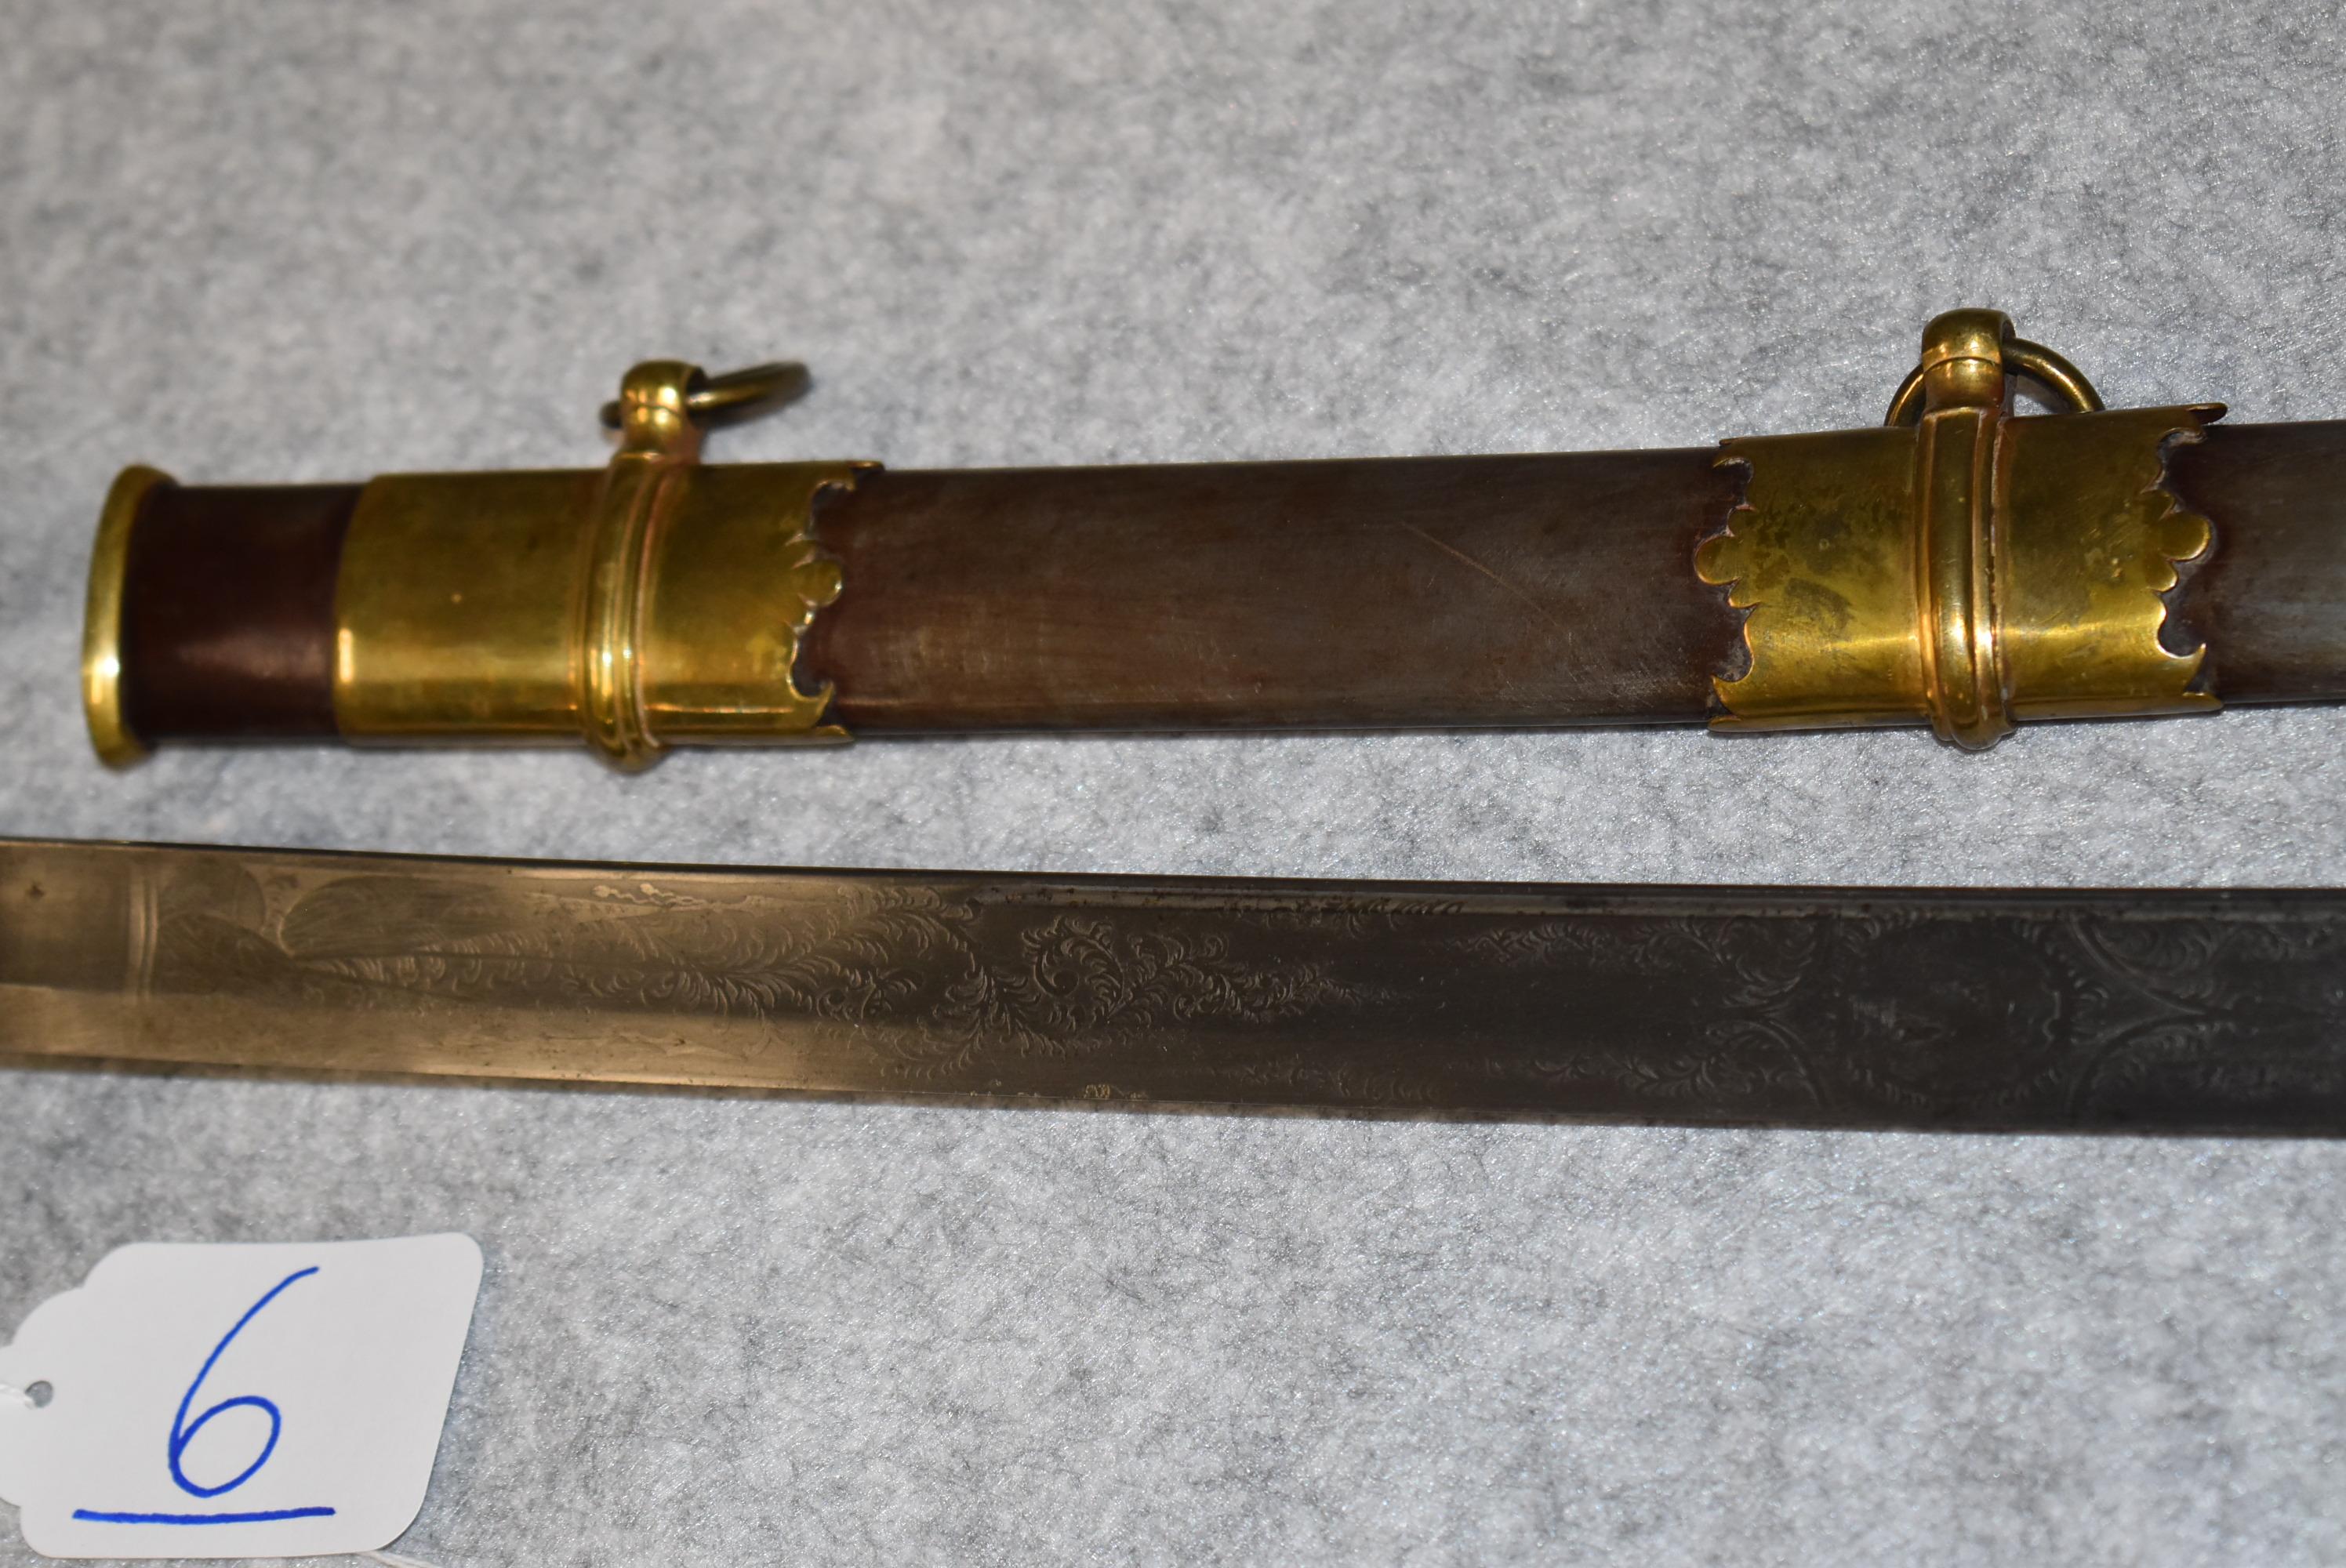 M1850 Staff and Field Officer's sword and scabbard